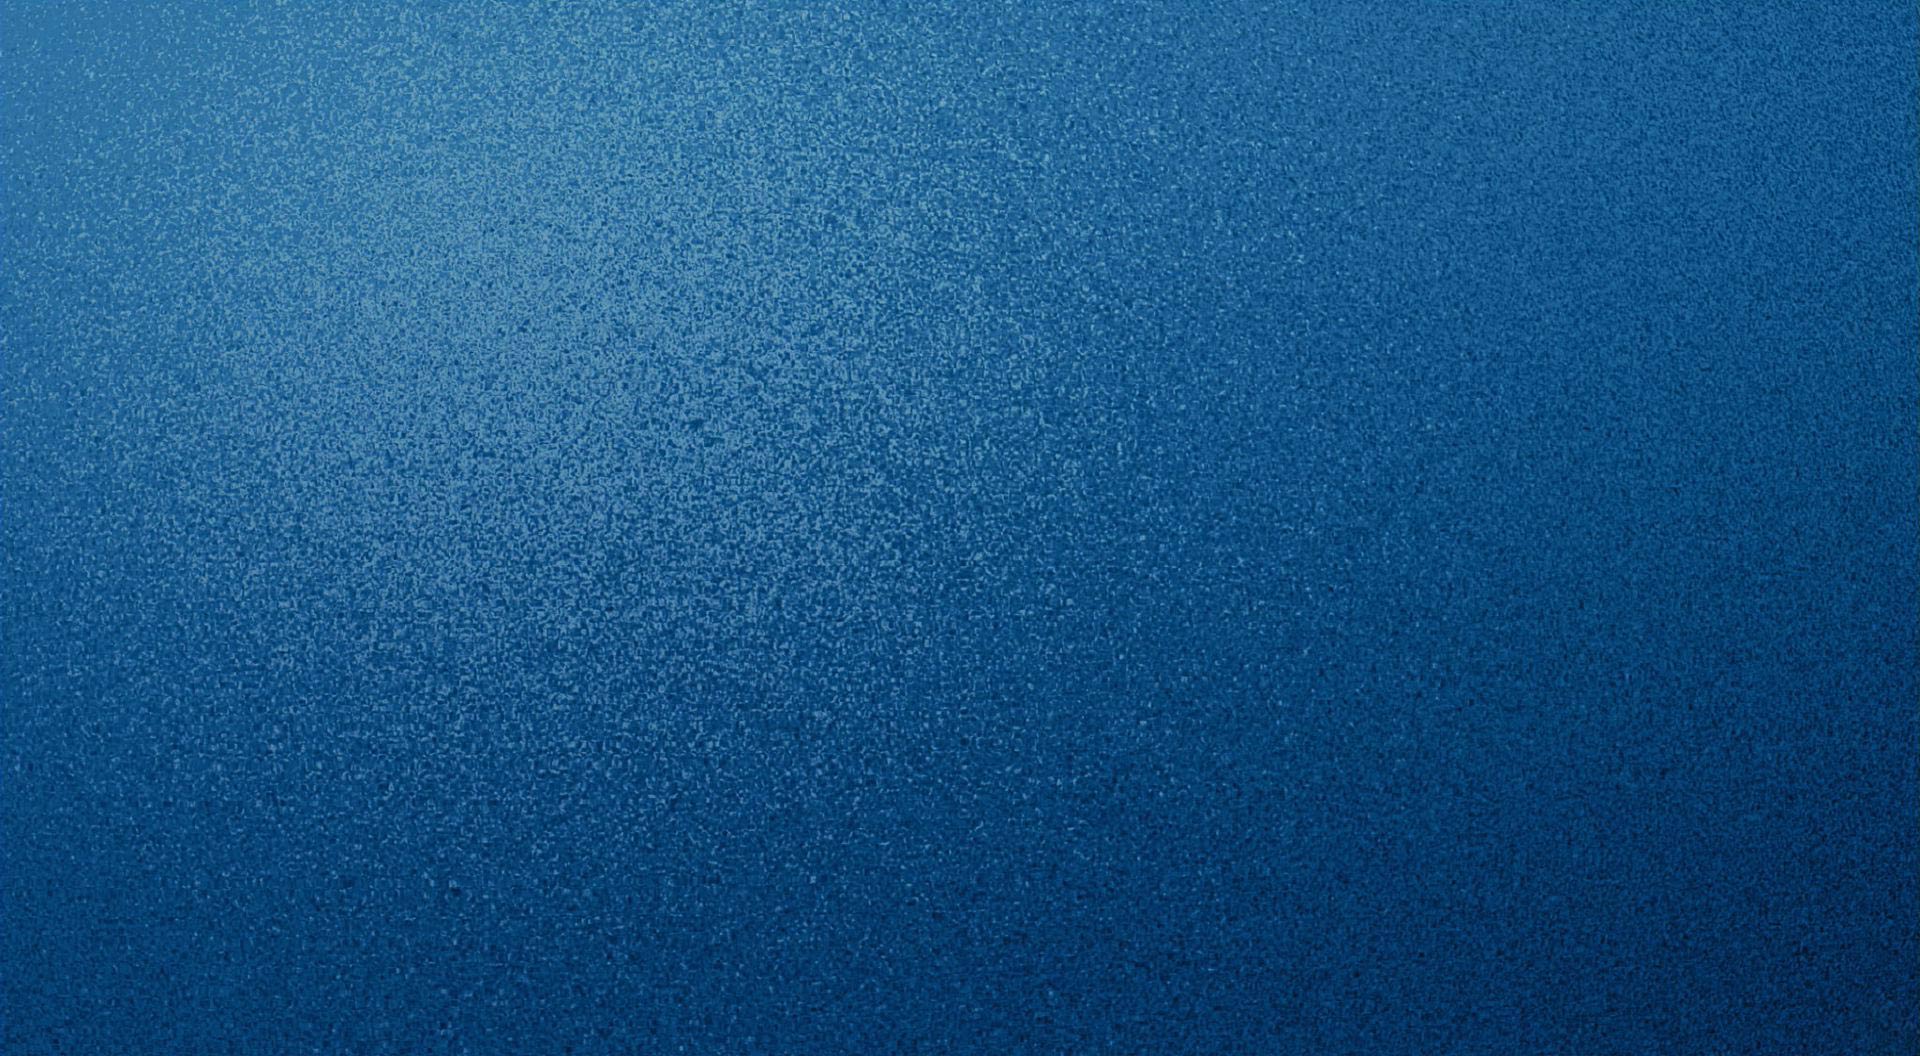 Textured Speckled Desktop Background Wallpaper For Use With Mac